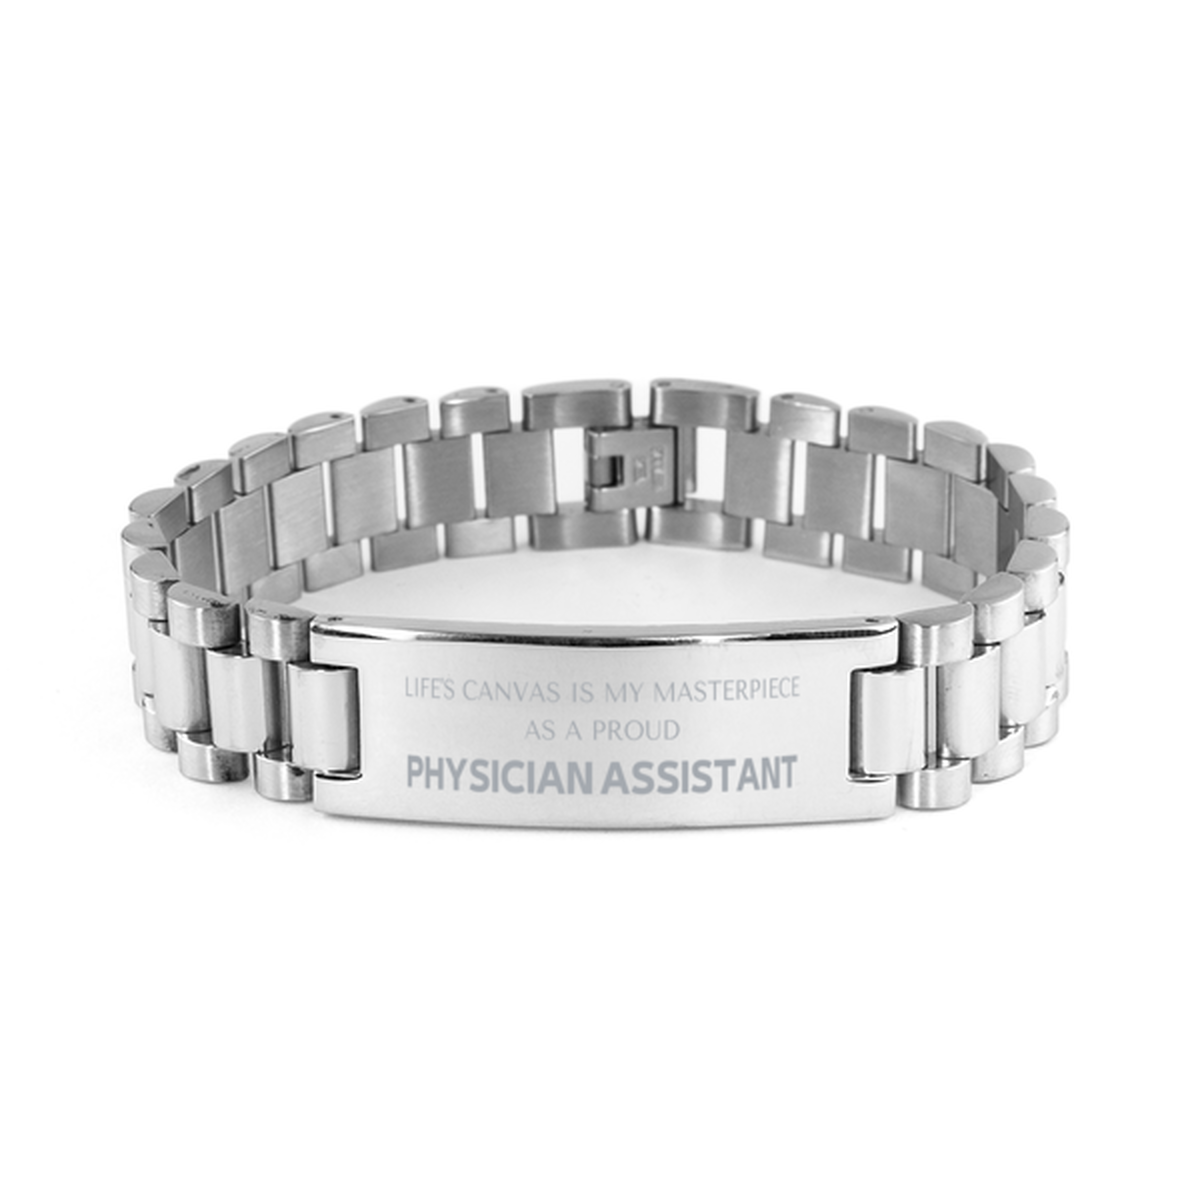 Proud Physician Assistant Gifts, Life's canvas is my masterpiece, Epic Birthday Christmas Unique Ladder Stainless Steel Bracelet For Physician Assistant, Coworkers, Men, Women, Friends